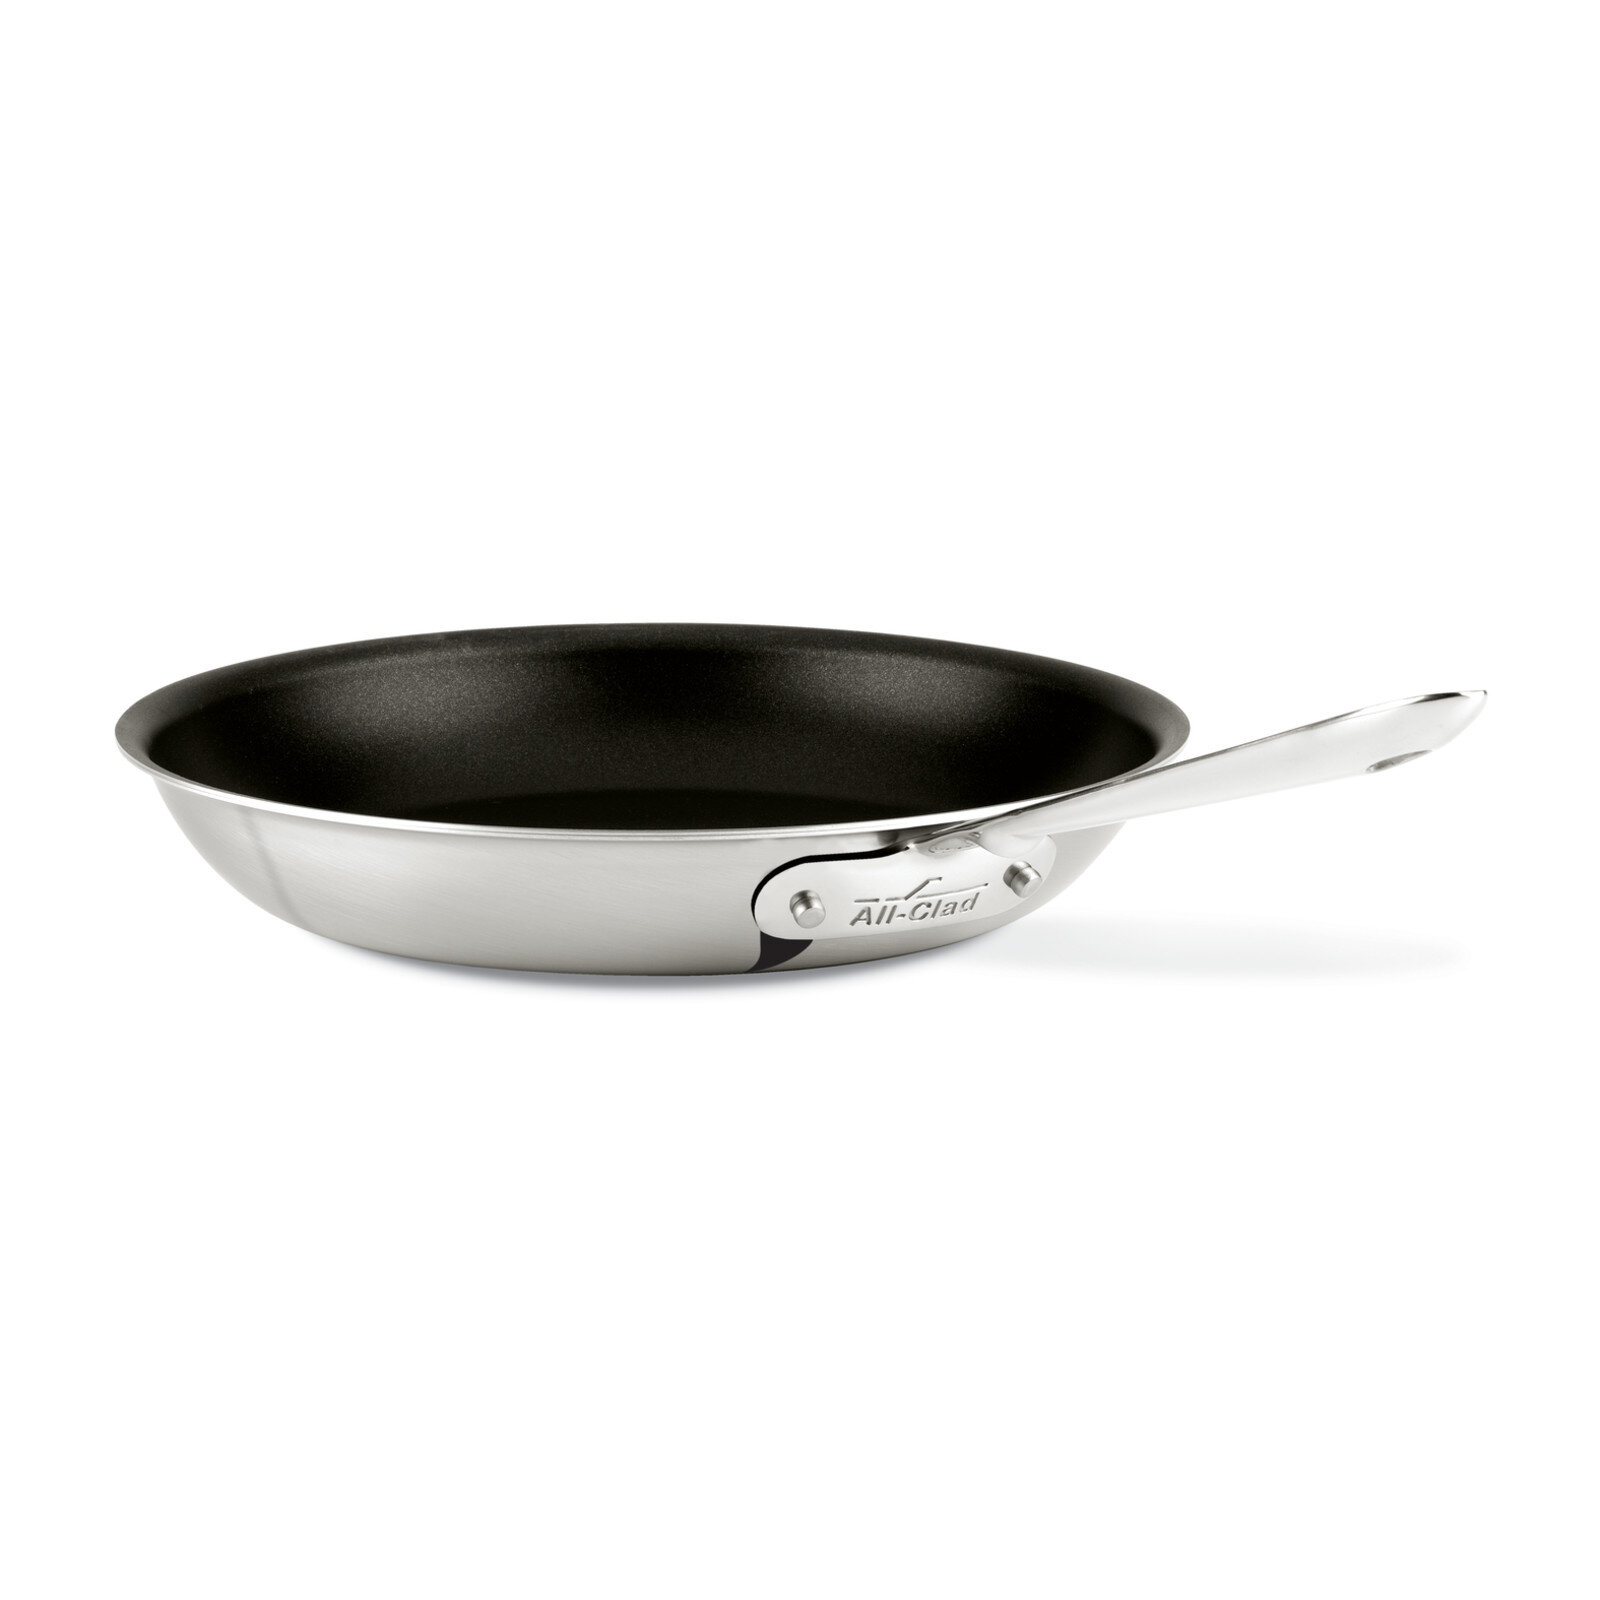 BergHOFF Balance Non-Stick Ceramic Omelet Pan 10, Recycled Aluminum, Moonmist Color: Green 3950457